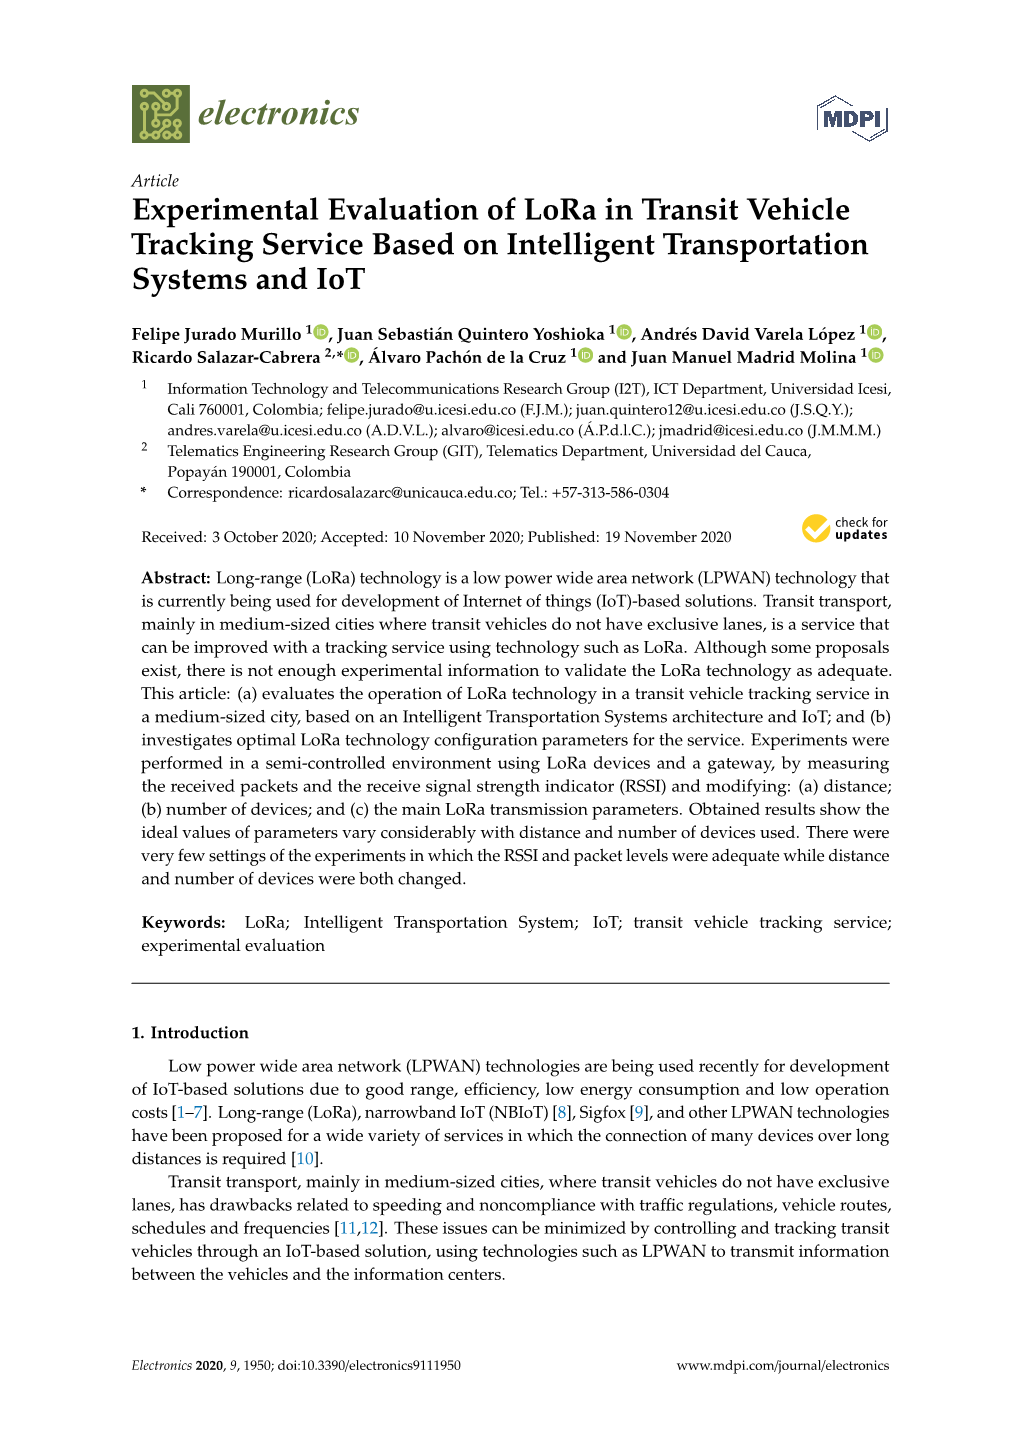 Experimental Evaluation of Lora in Transit Vehicle Tracking Service Based on Intelligent Transportation Systems and Iot